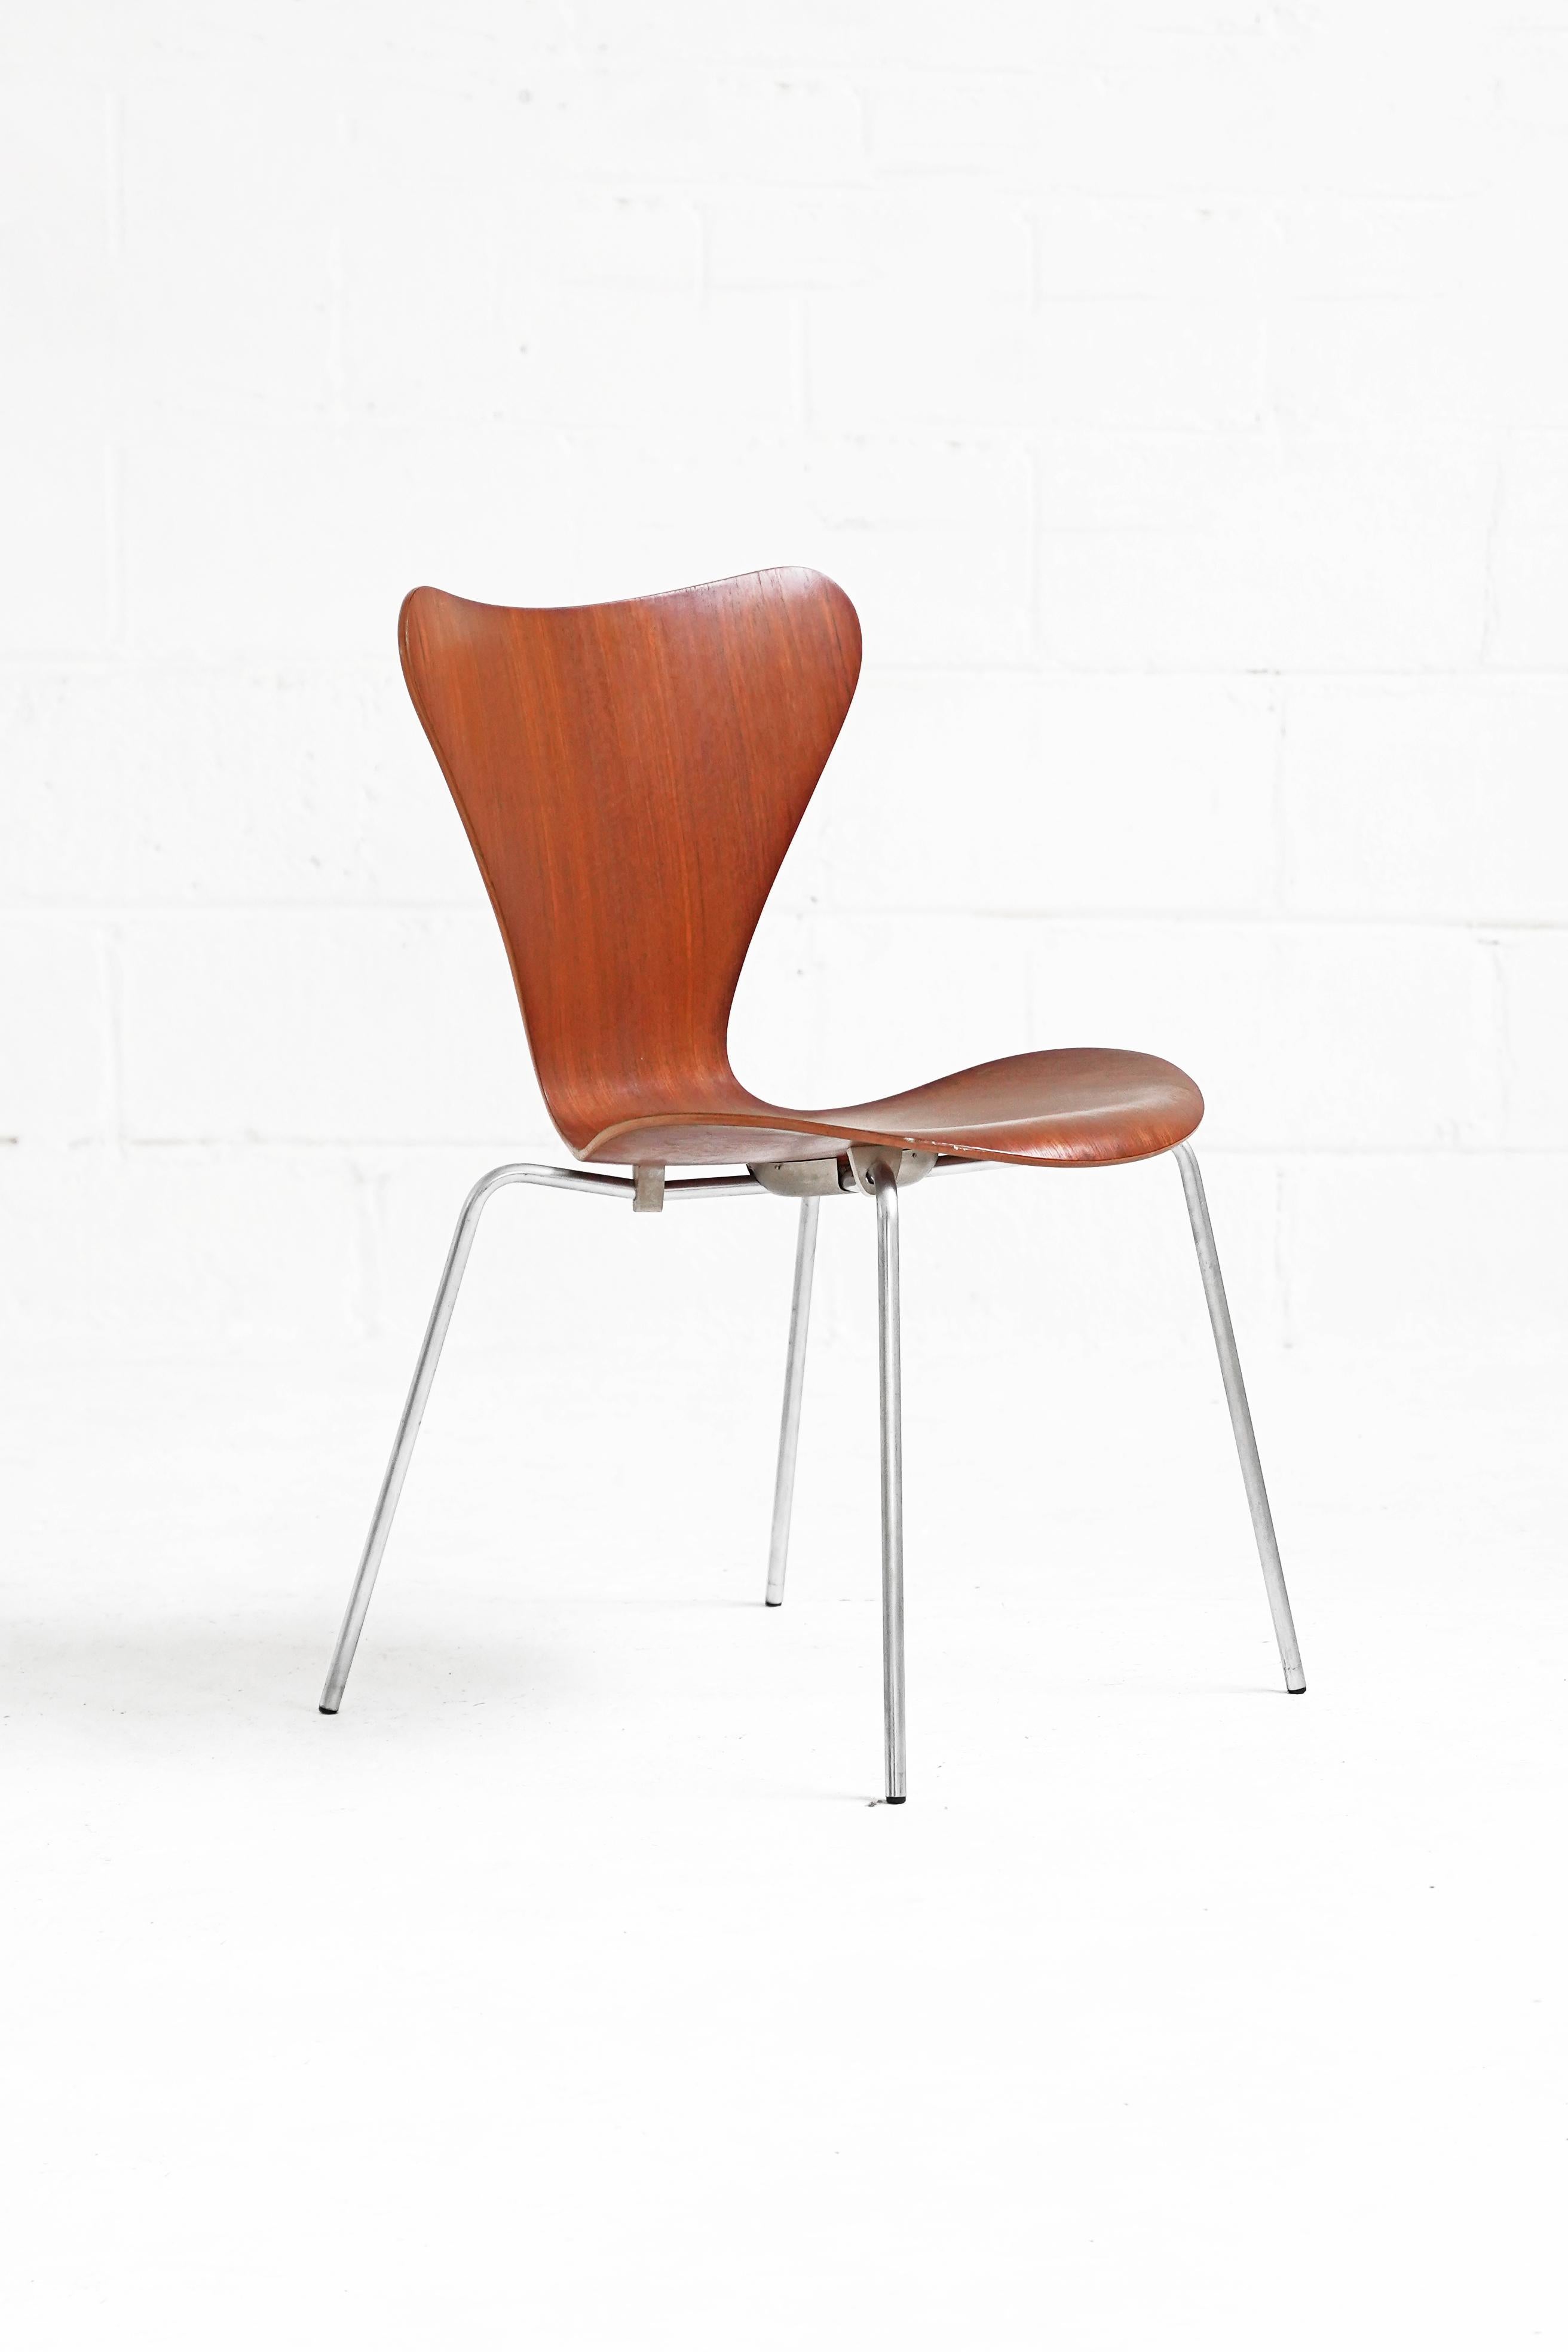 1955-1959 production, First Edition. Stamped metal (not plastic) base caps with original Fritz Hansen (FH) engraving and serial codes for each chair. Original molded plywood seat, rubber base mounts and nickel plated legs in amazing vintage original